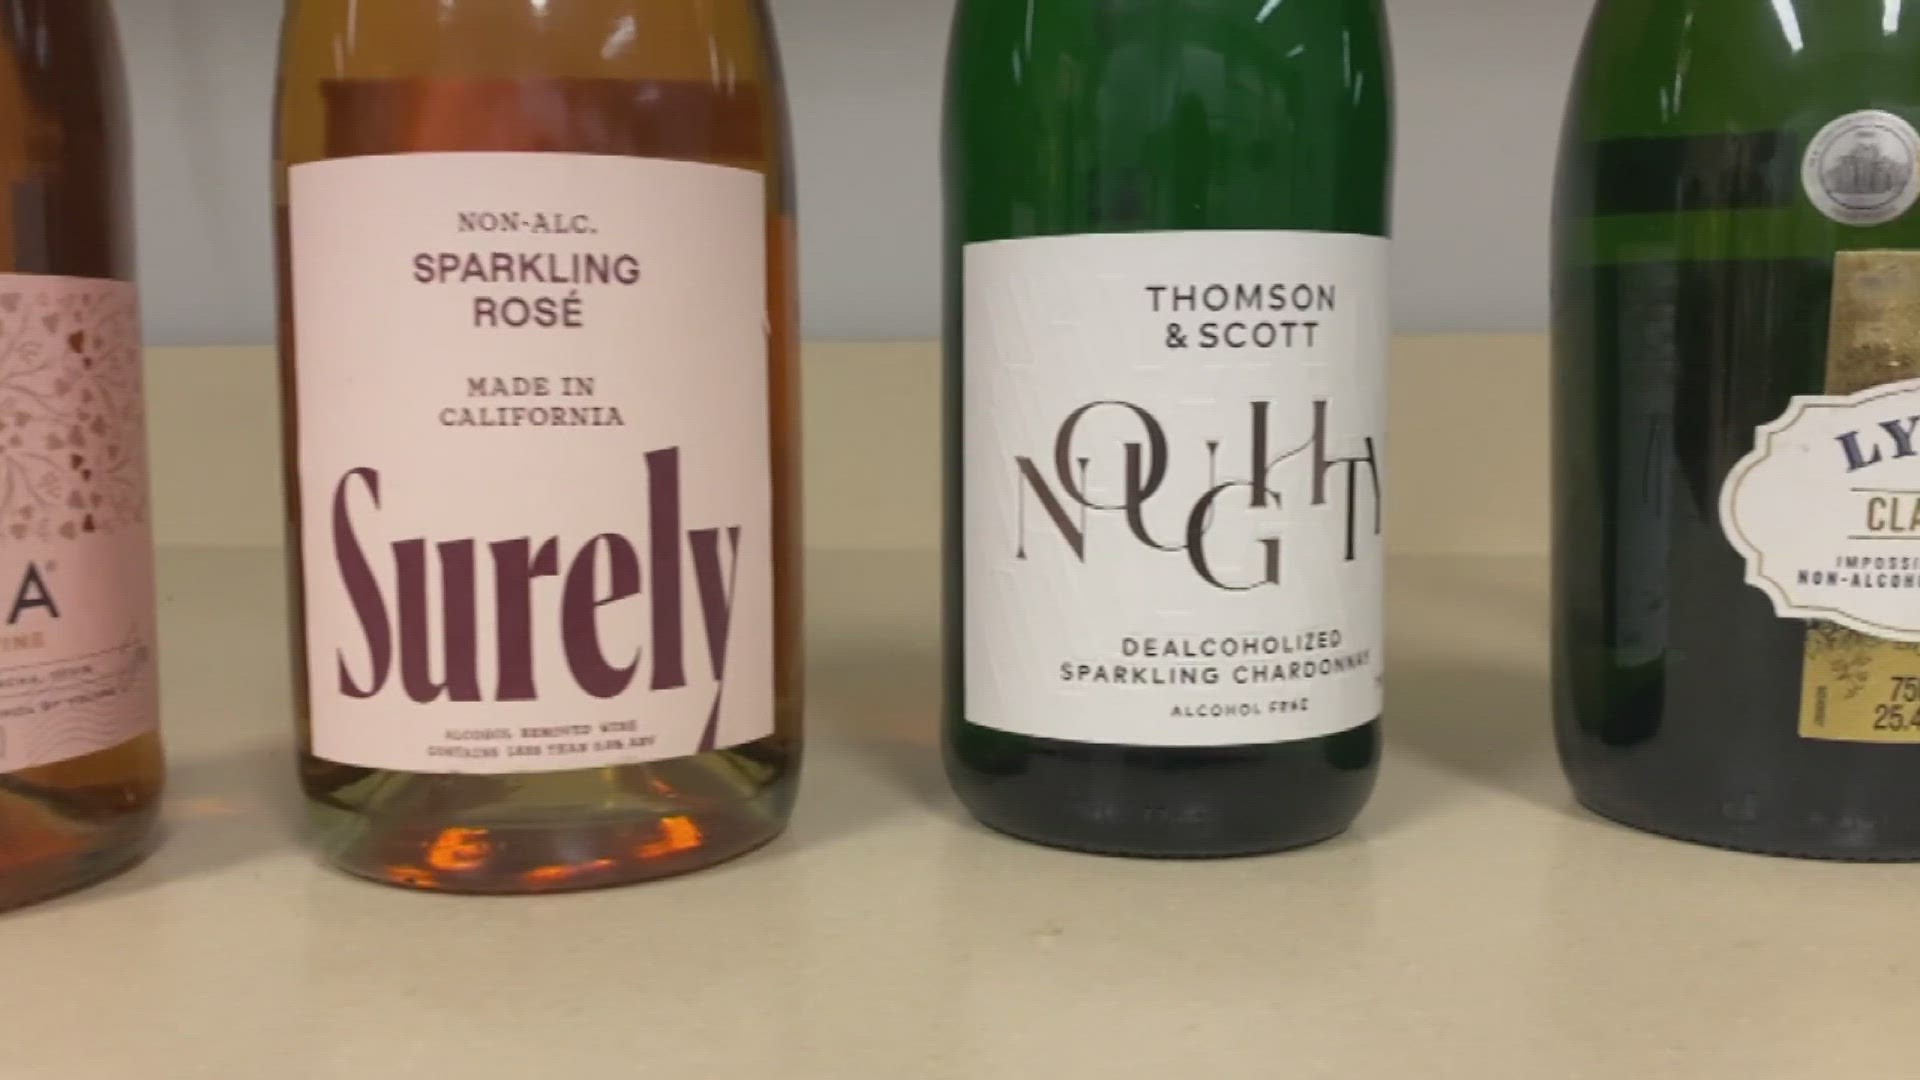 Consumer Reports taste tests non-alcoholic wines